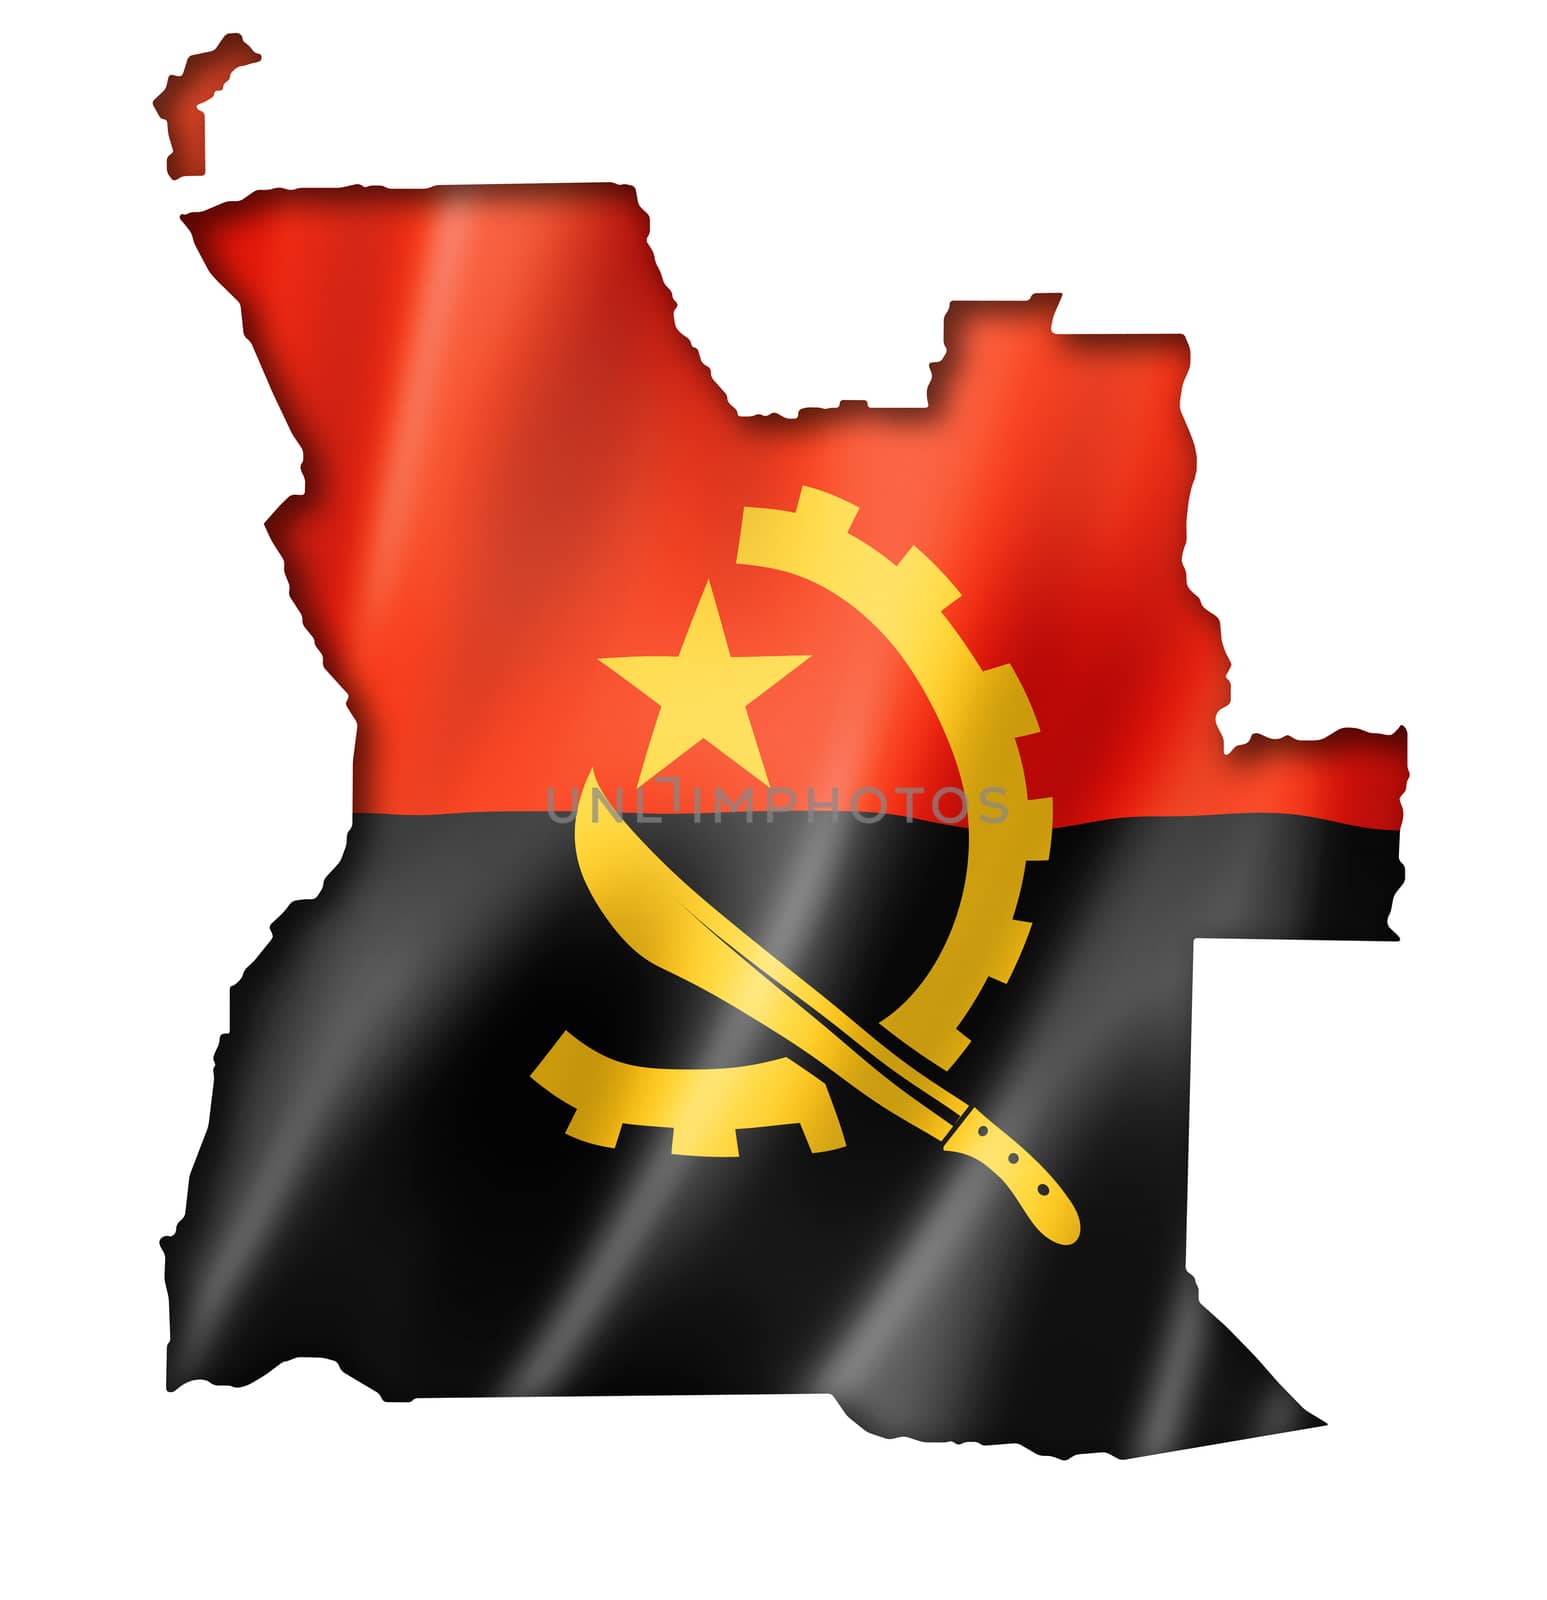 Angola flag map, three dimensional render, isolated on white